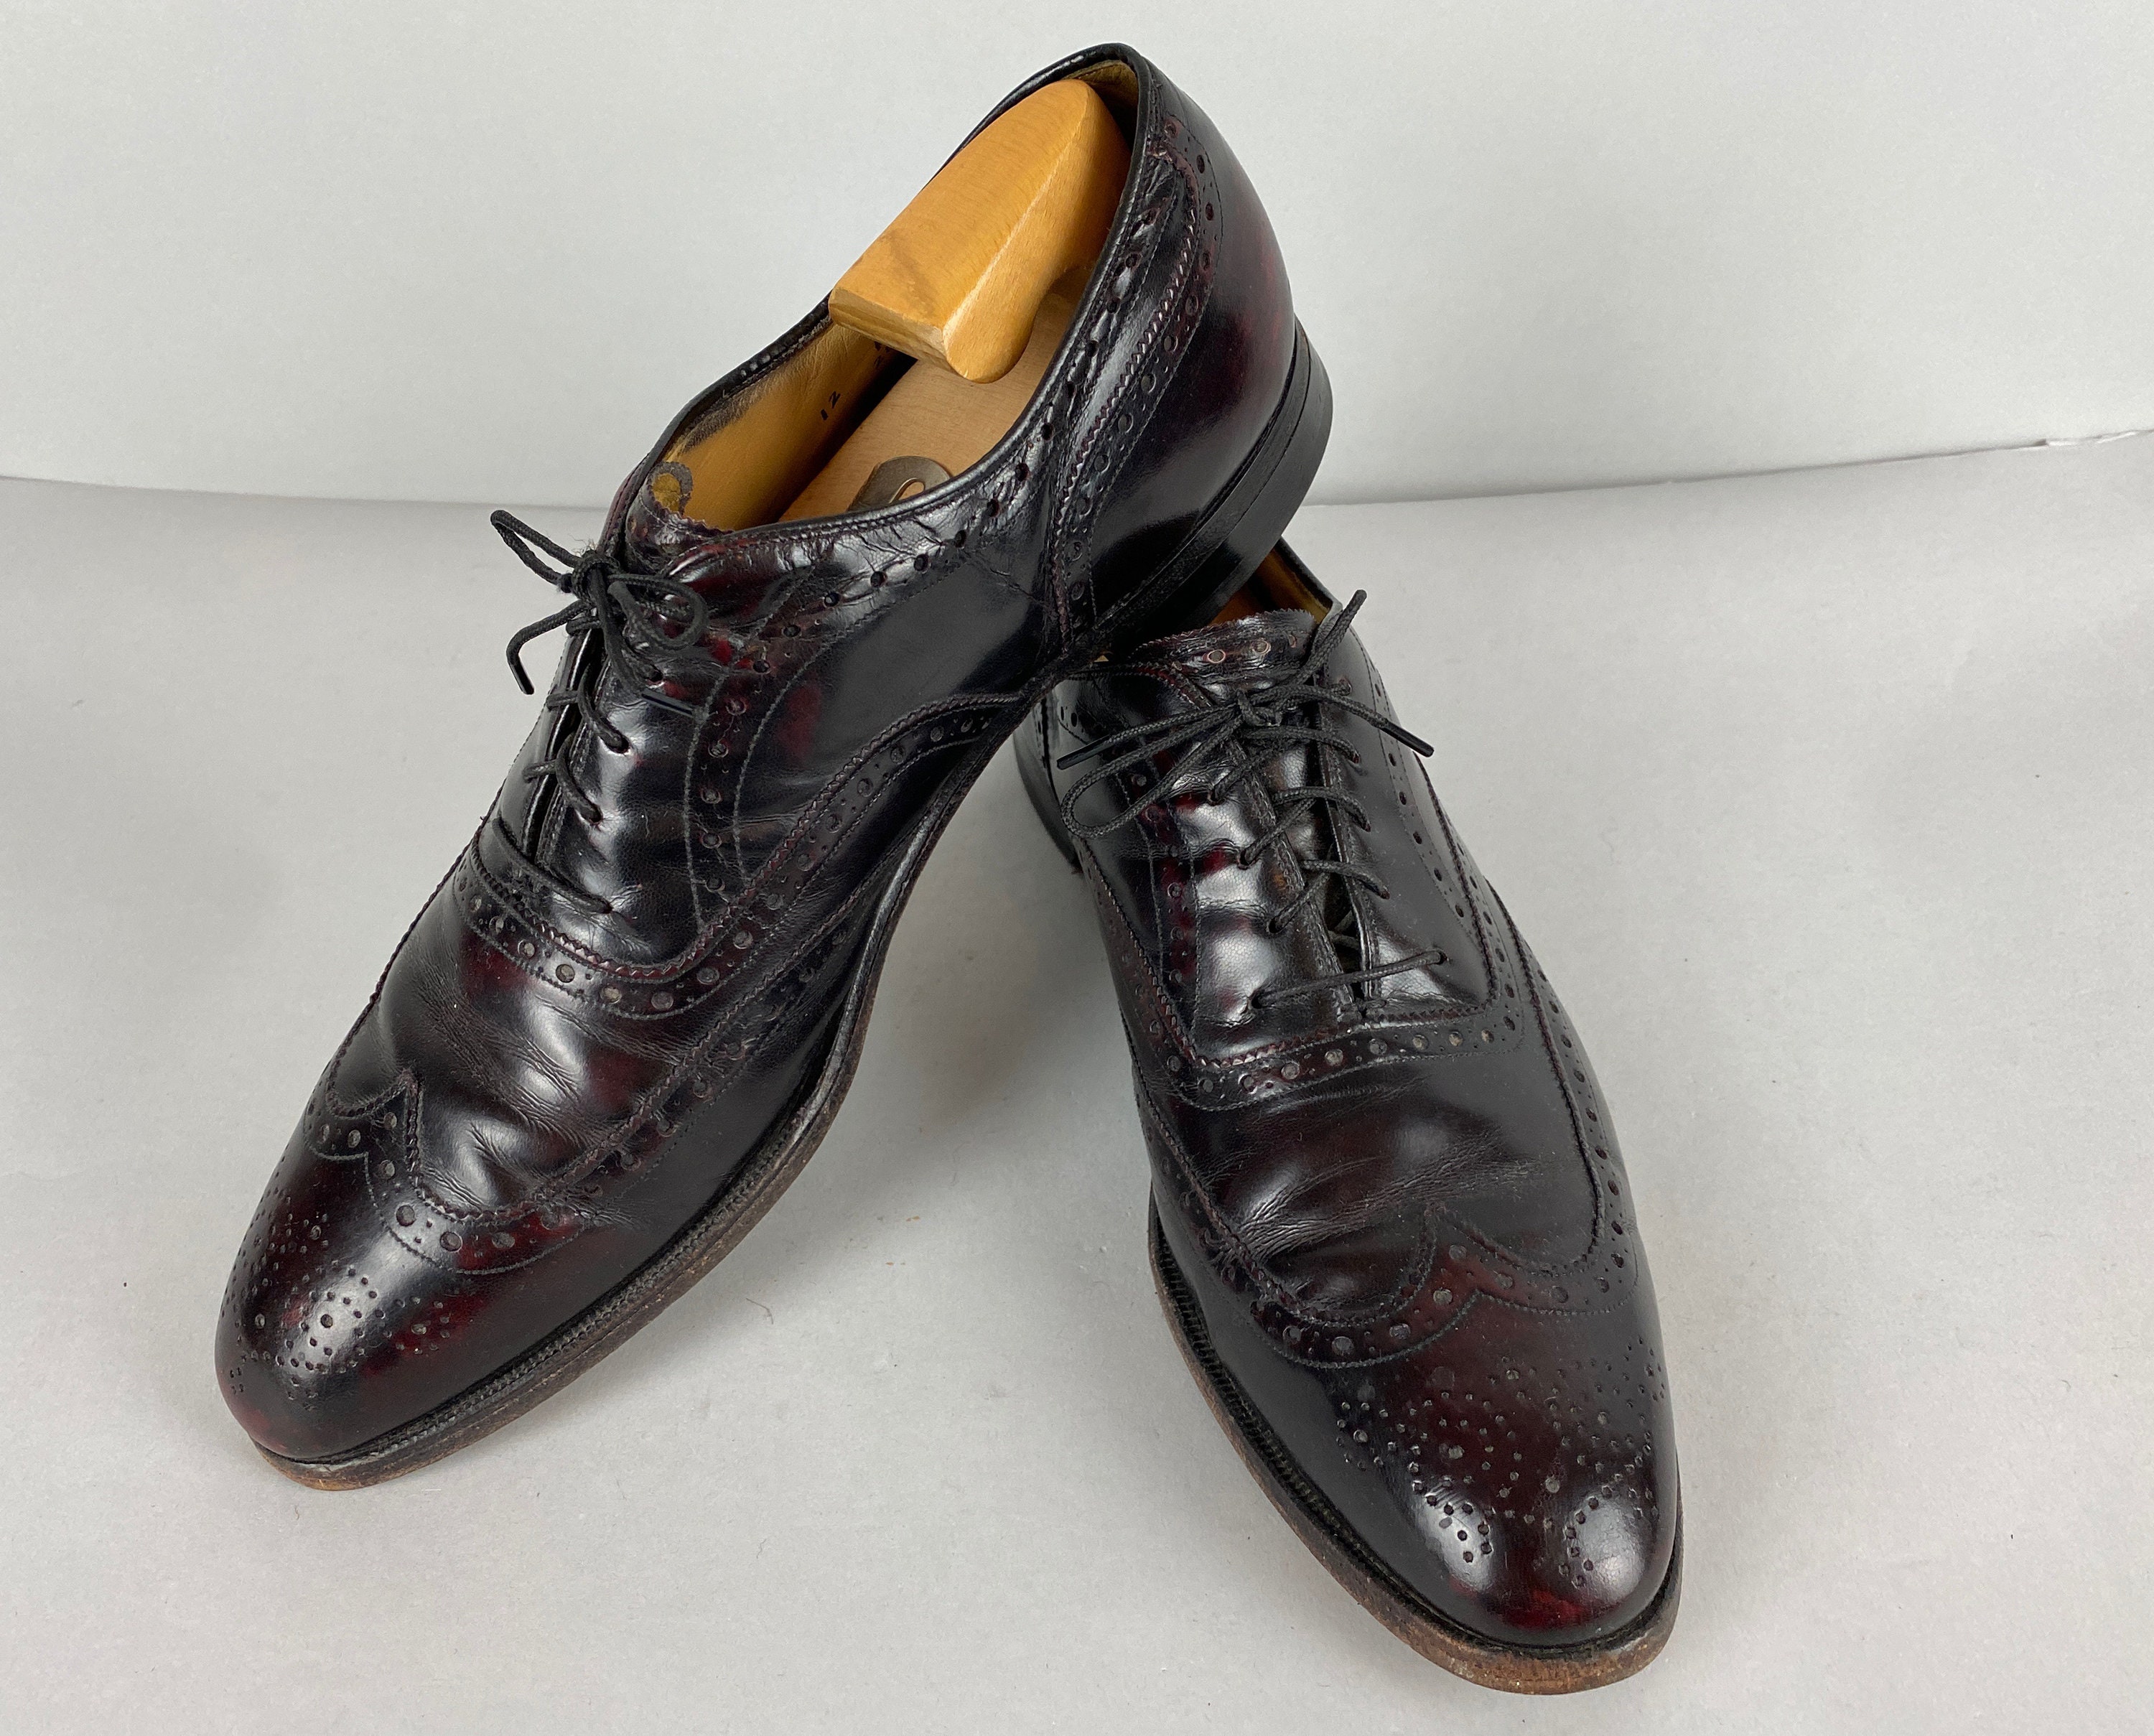 1940s “Aristocraft” Mens Shoes | Vintage 40s Oxblood Red Black Leather ...